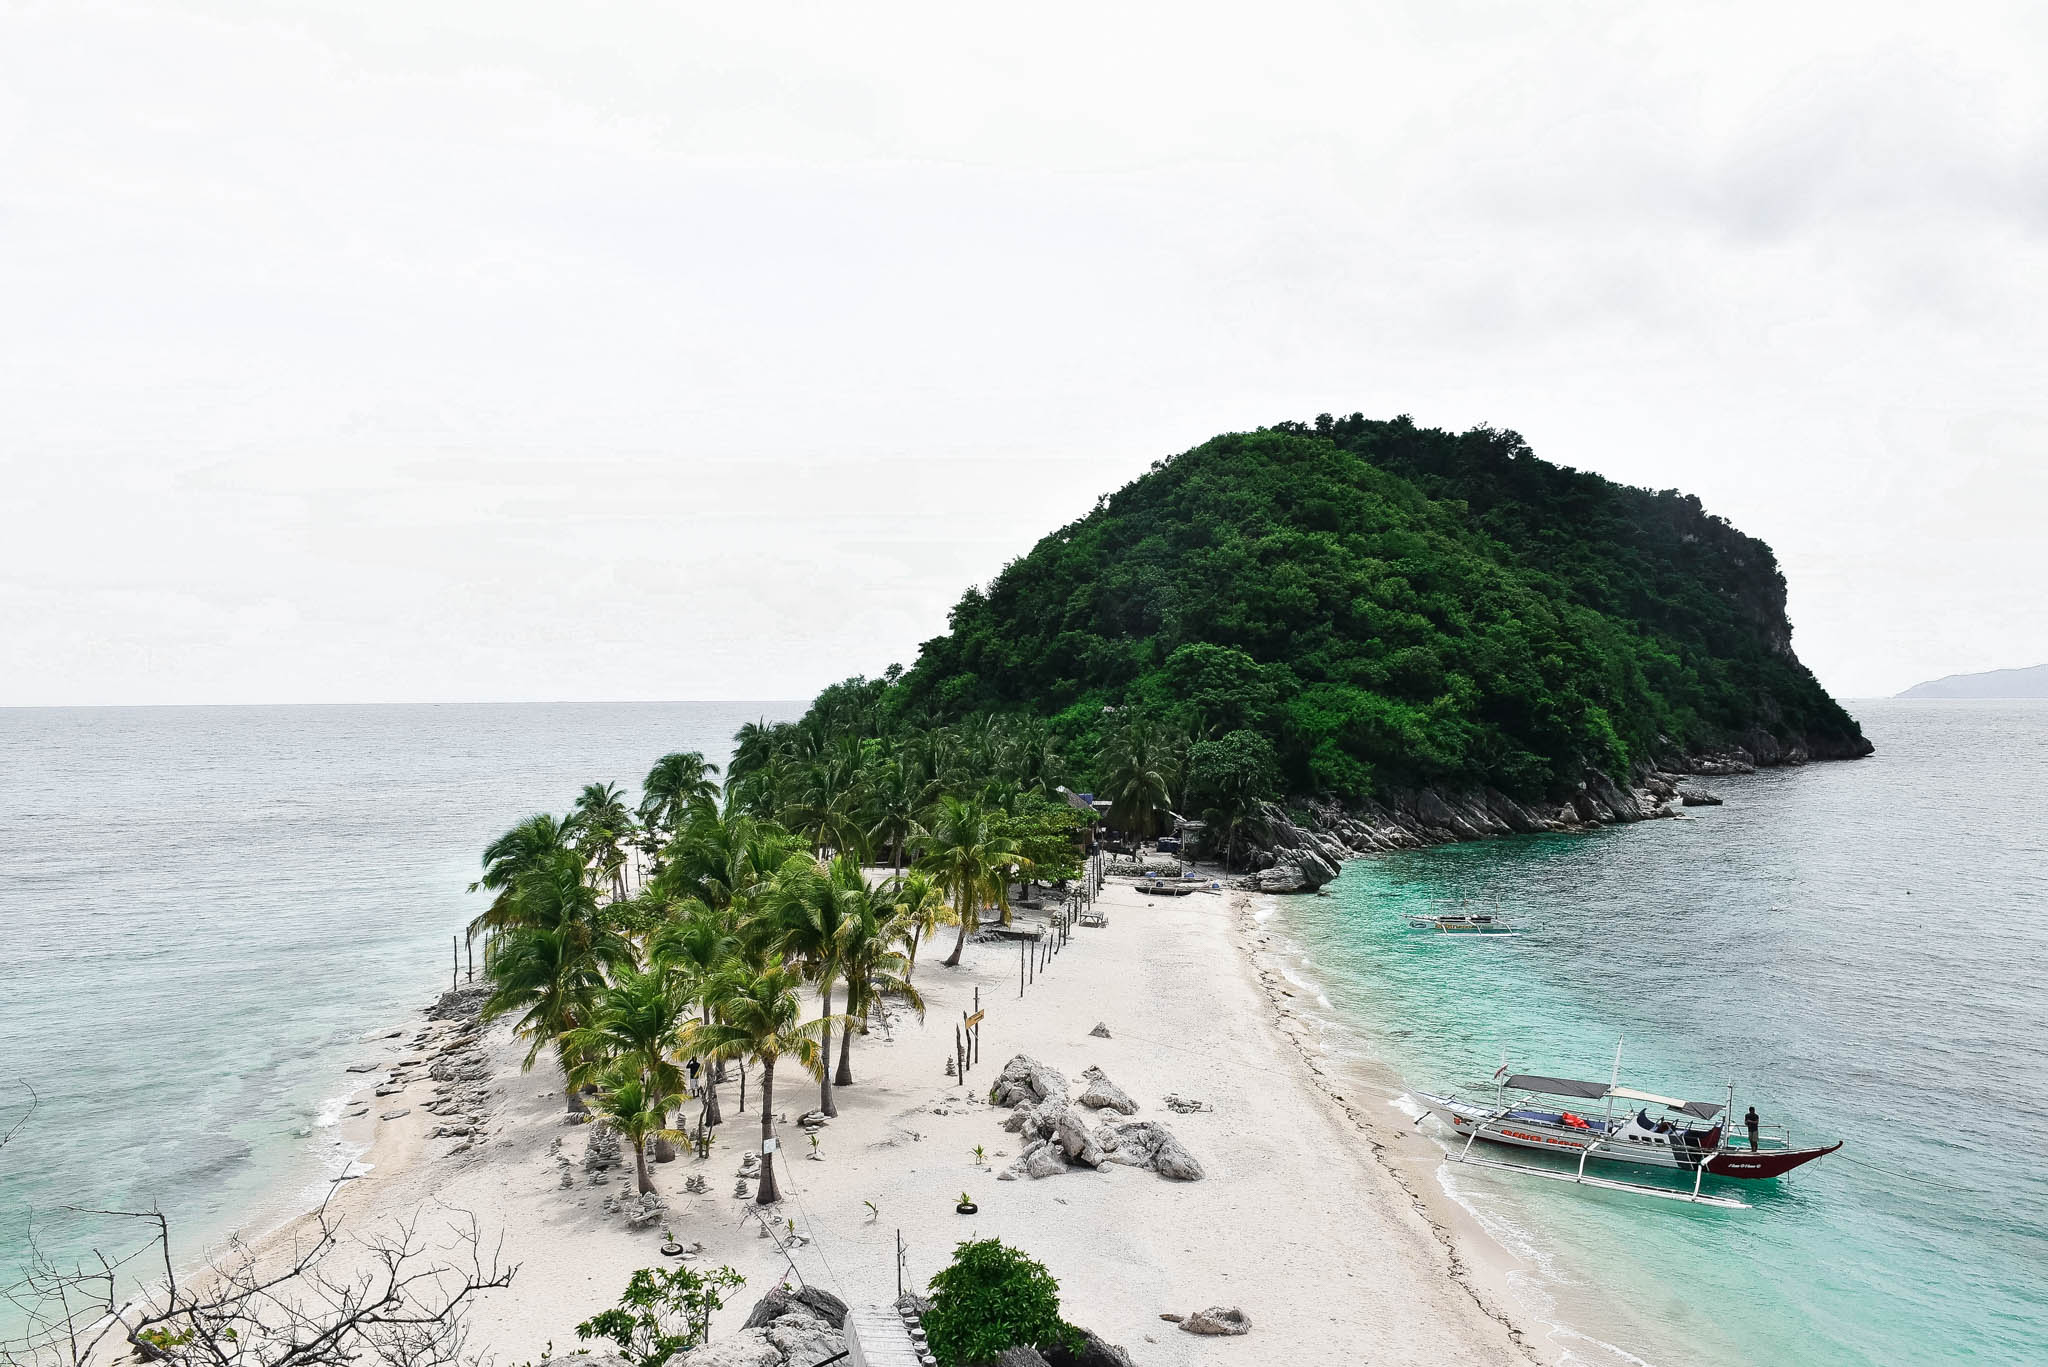 10 THINGS TO DO IN GIGANTES ISLAND